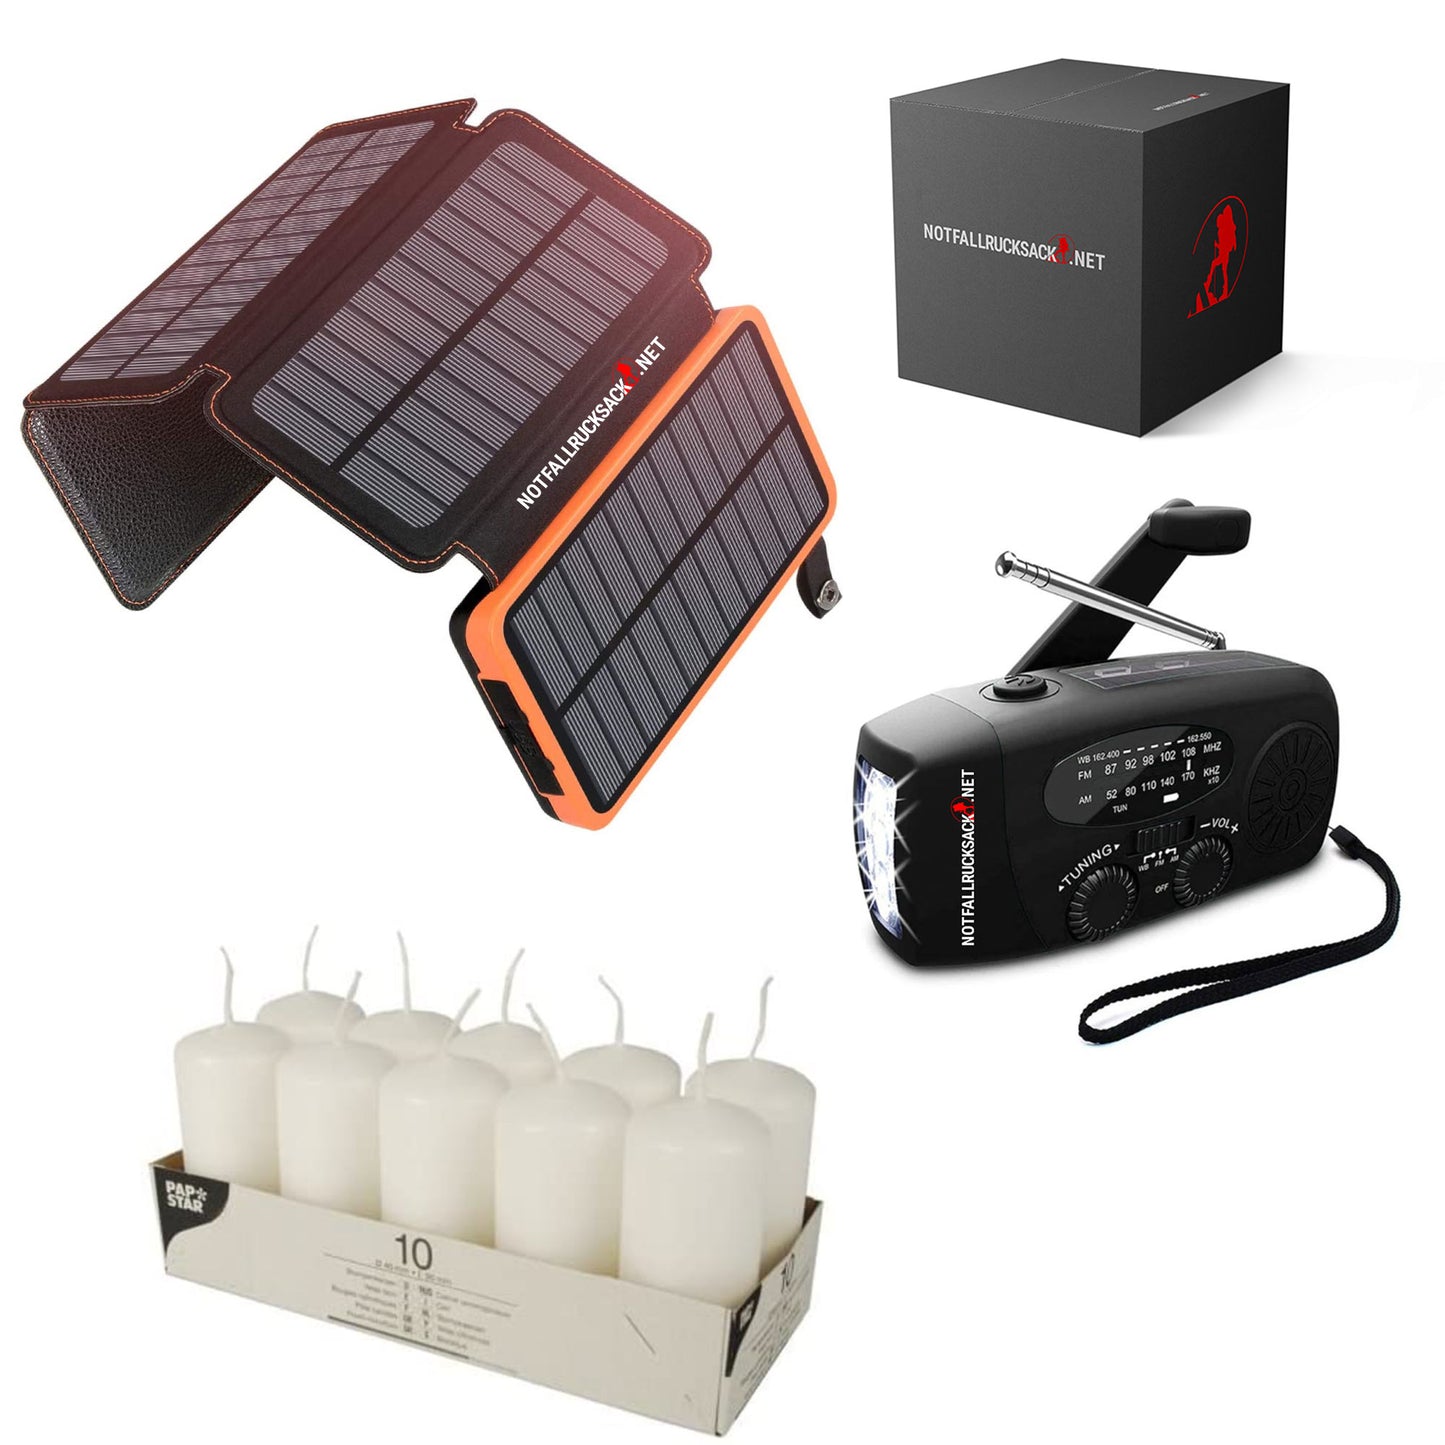 Power failure package Medium emergency power kit with 26800mah solar power bank crank radio and candles